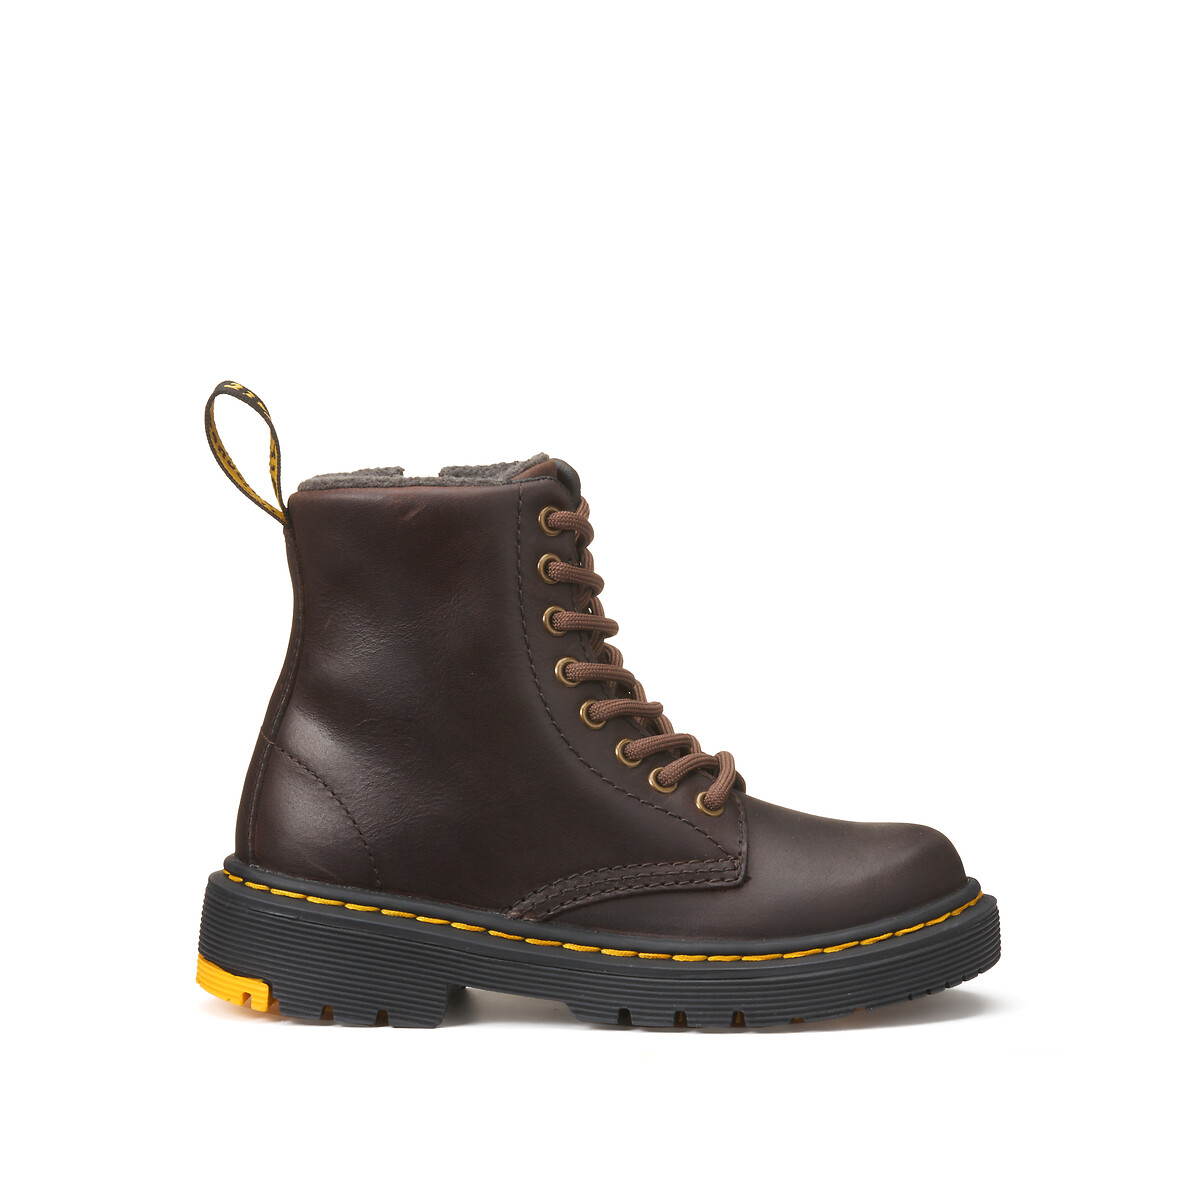 Image of Kids 1460 J Wintergrip Ankle Boots in Leather